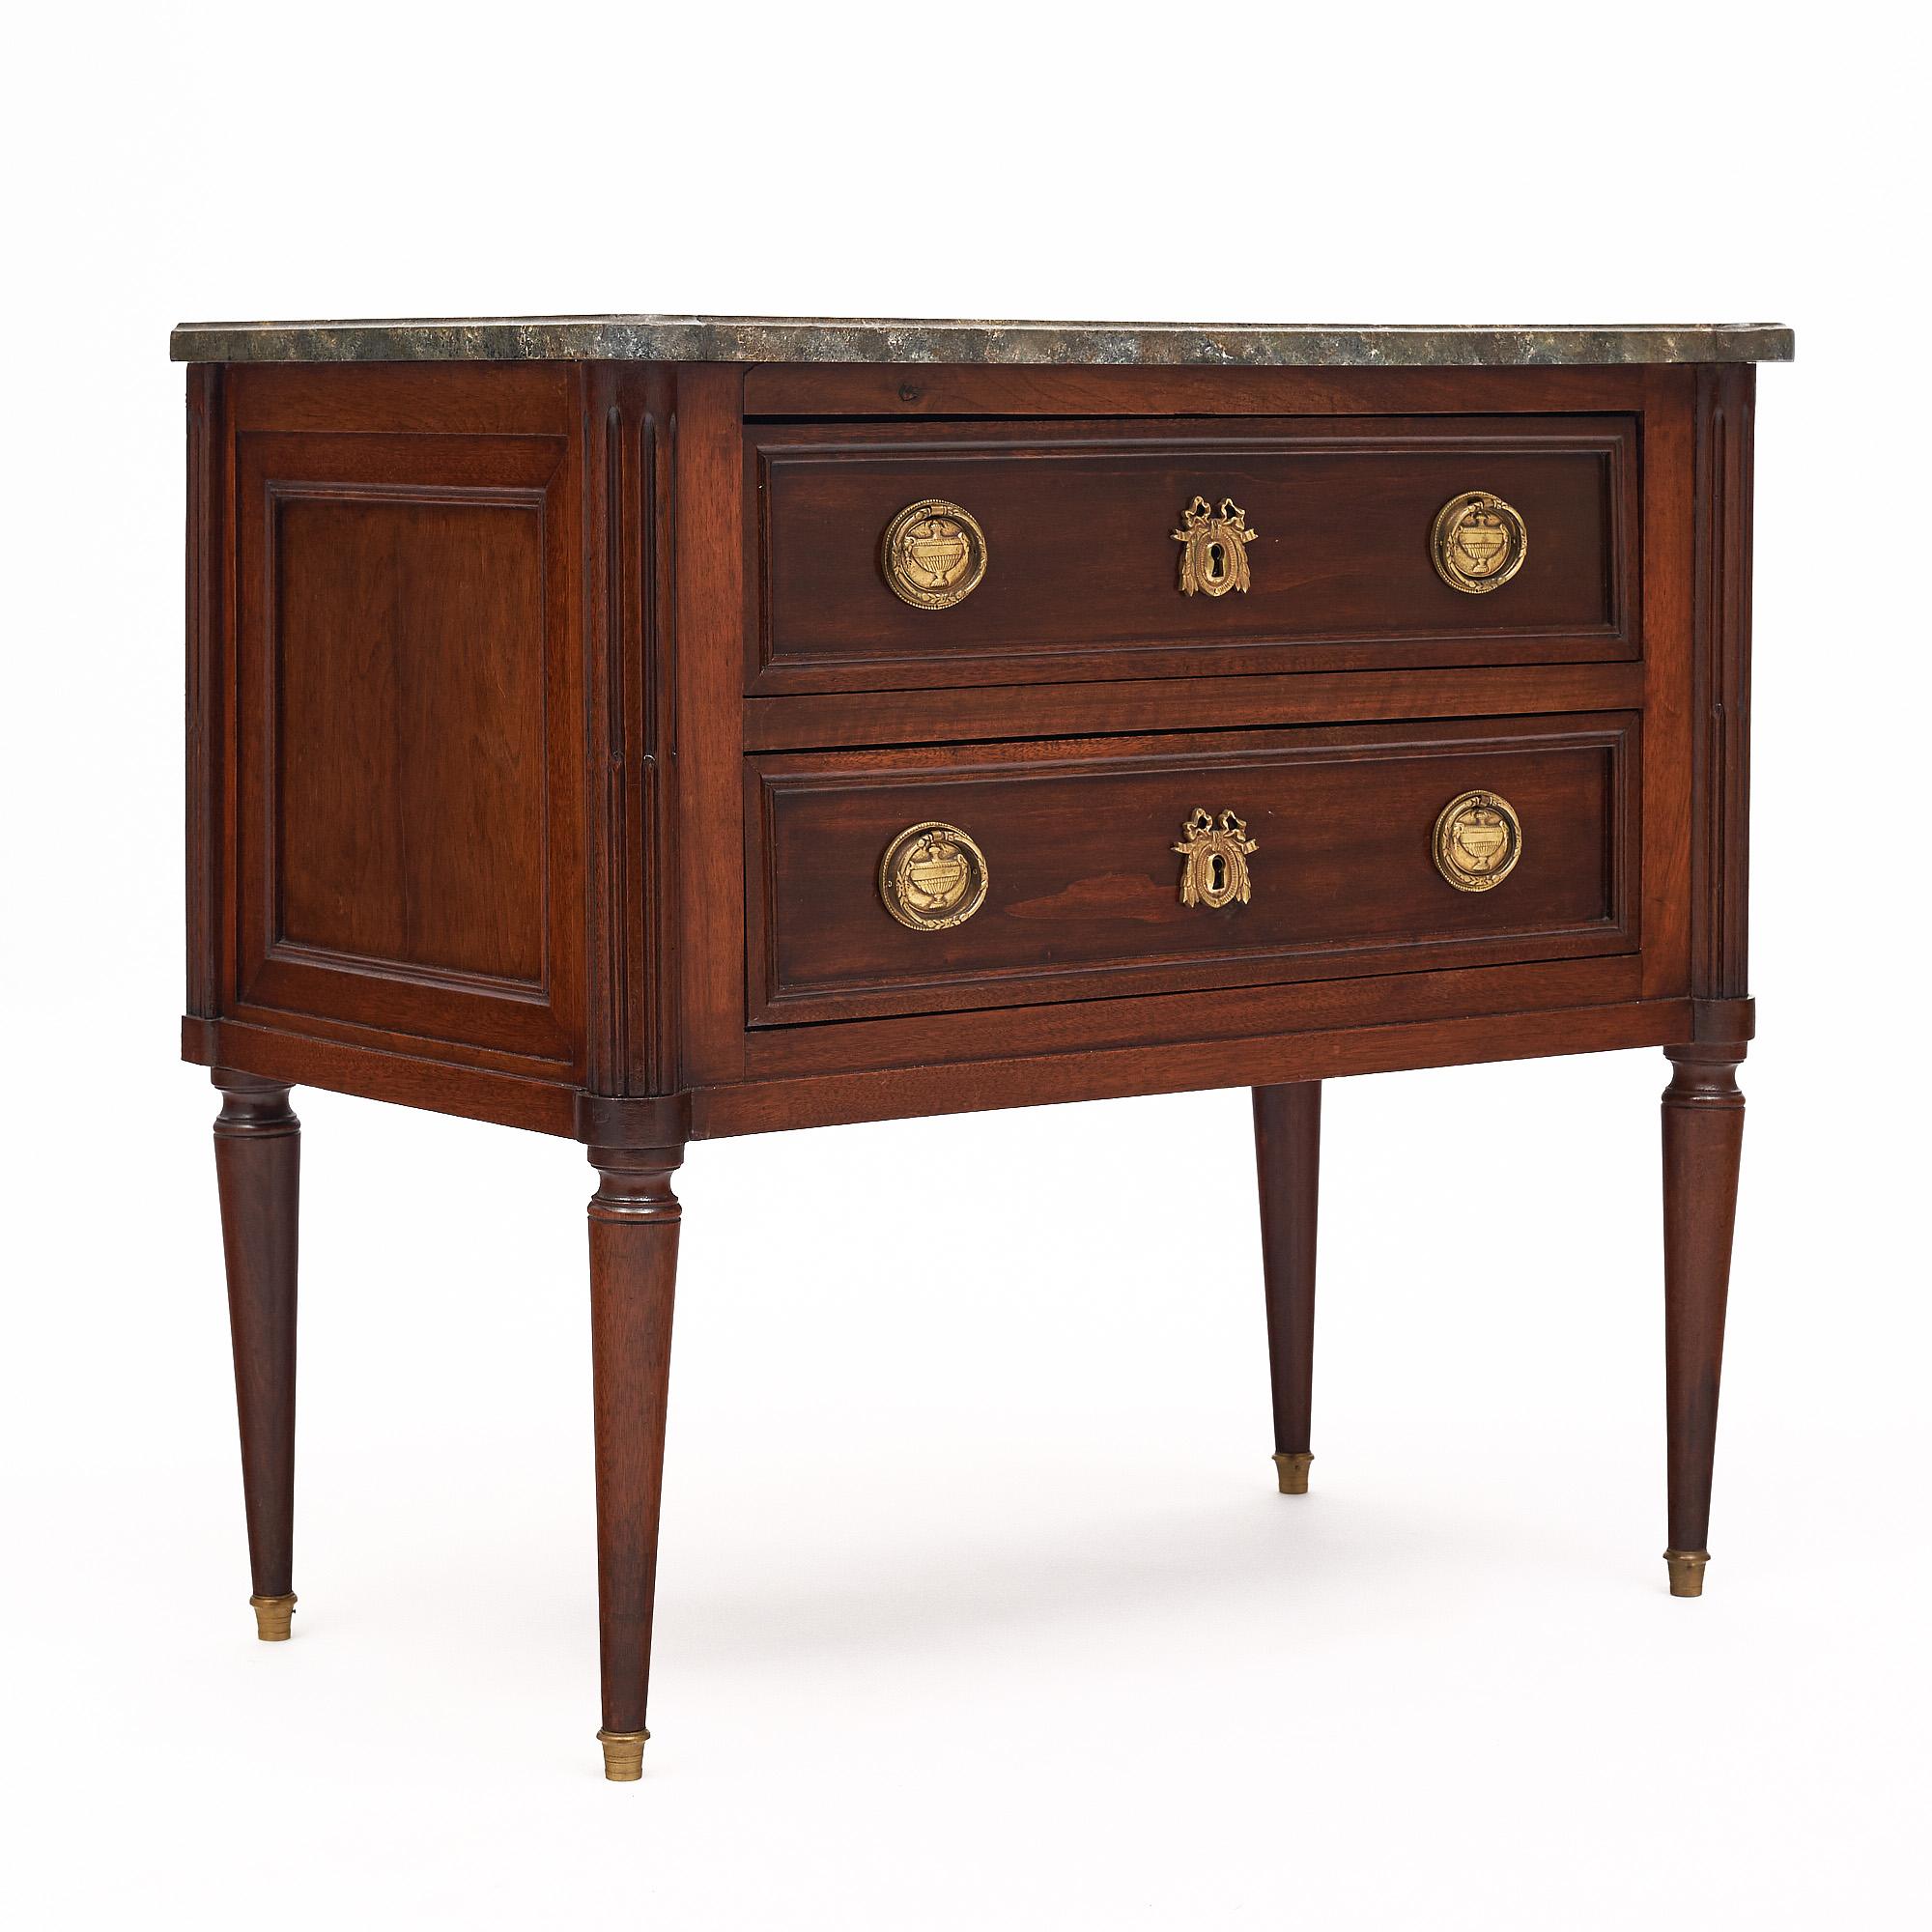 Chest of drawers from France in the Louis XVI style. This piece is made of mahogany that has been finished with a lustrous French polish of museum quality. There are two dovetailed drawers each featuring finely cast original brass hardware. The four